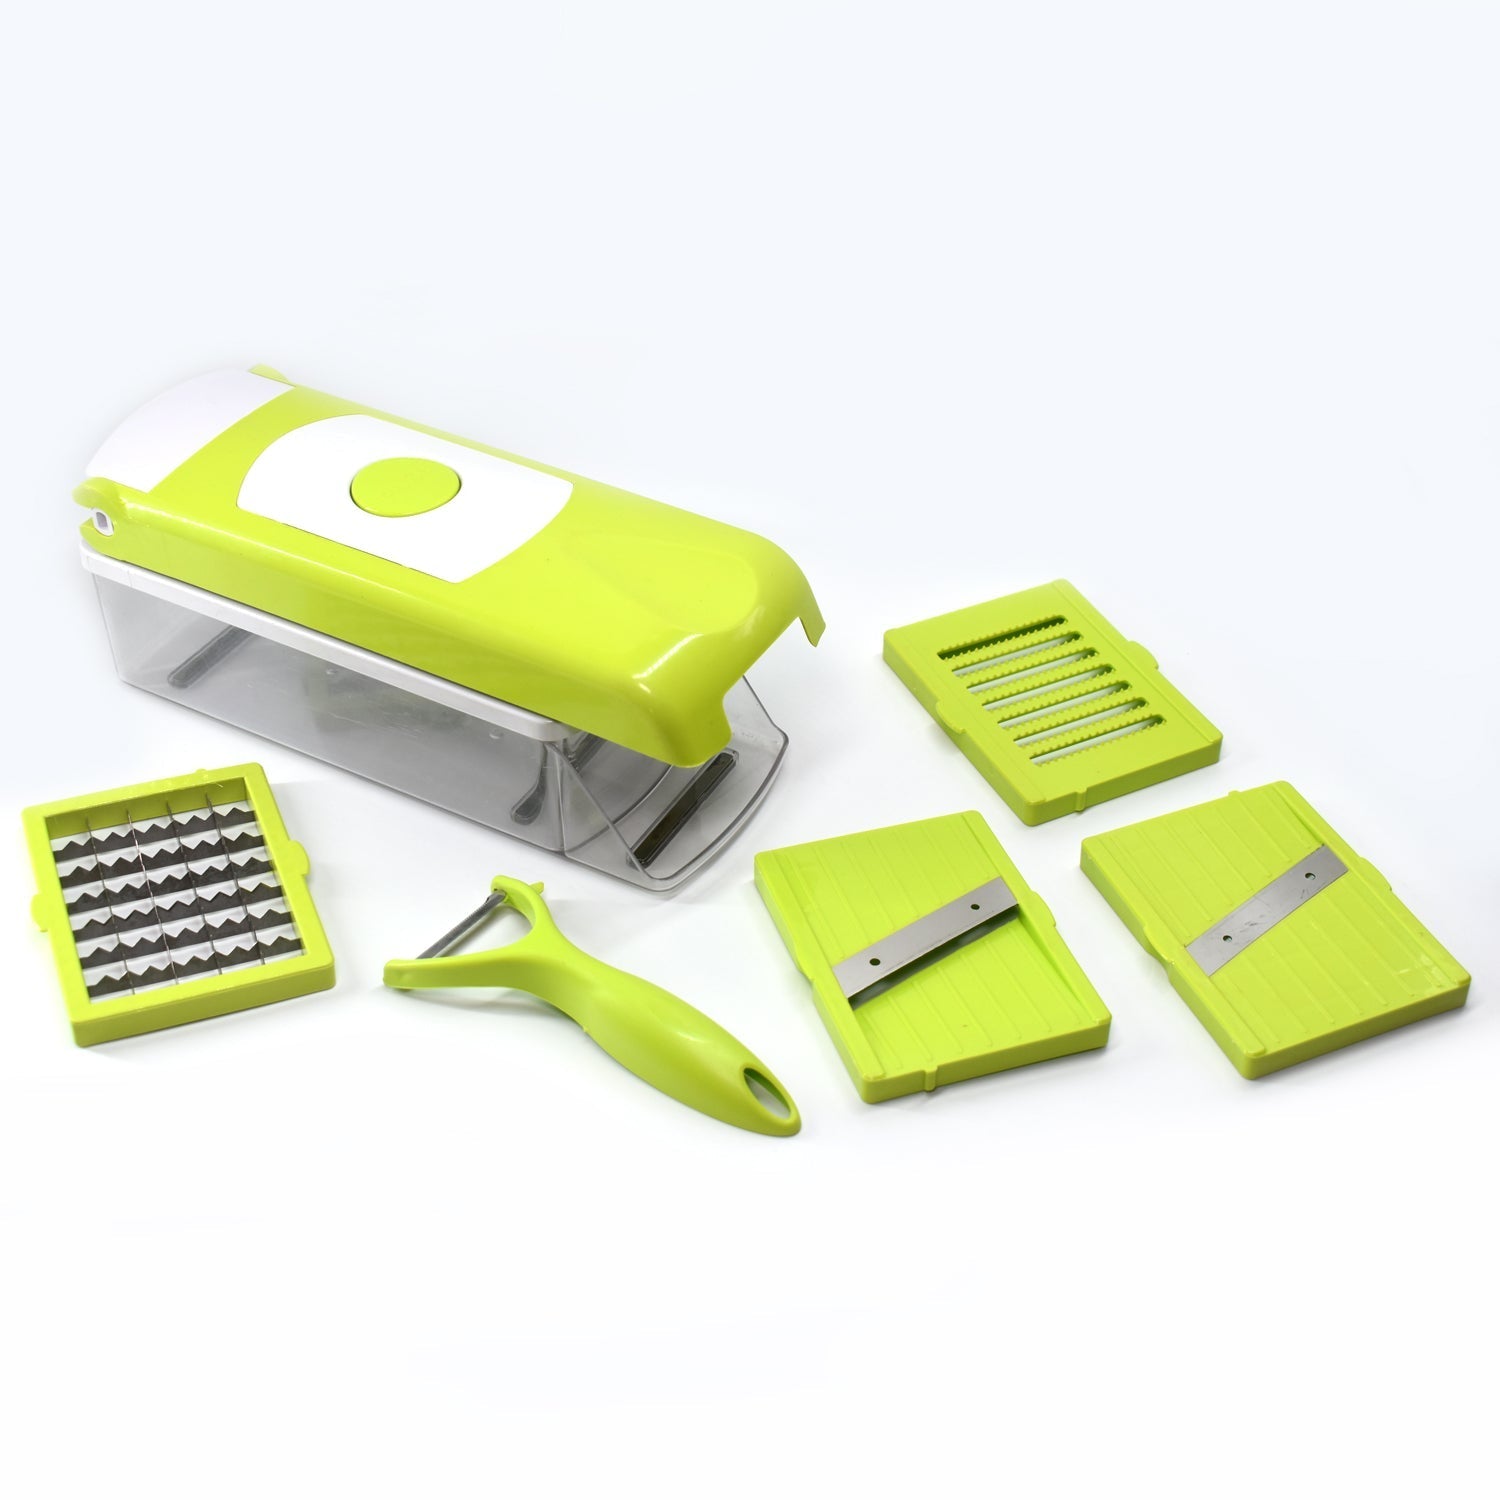 7074 6In1 Veg Chipser Used To Cut Vegetables And Fruits Easily In All Kinds Of Places. freeshipping - DeoDap